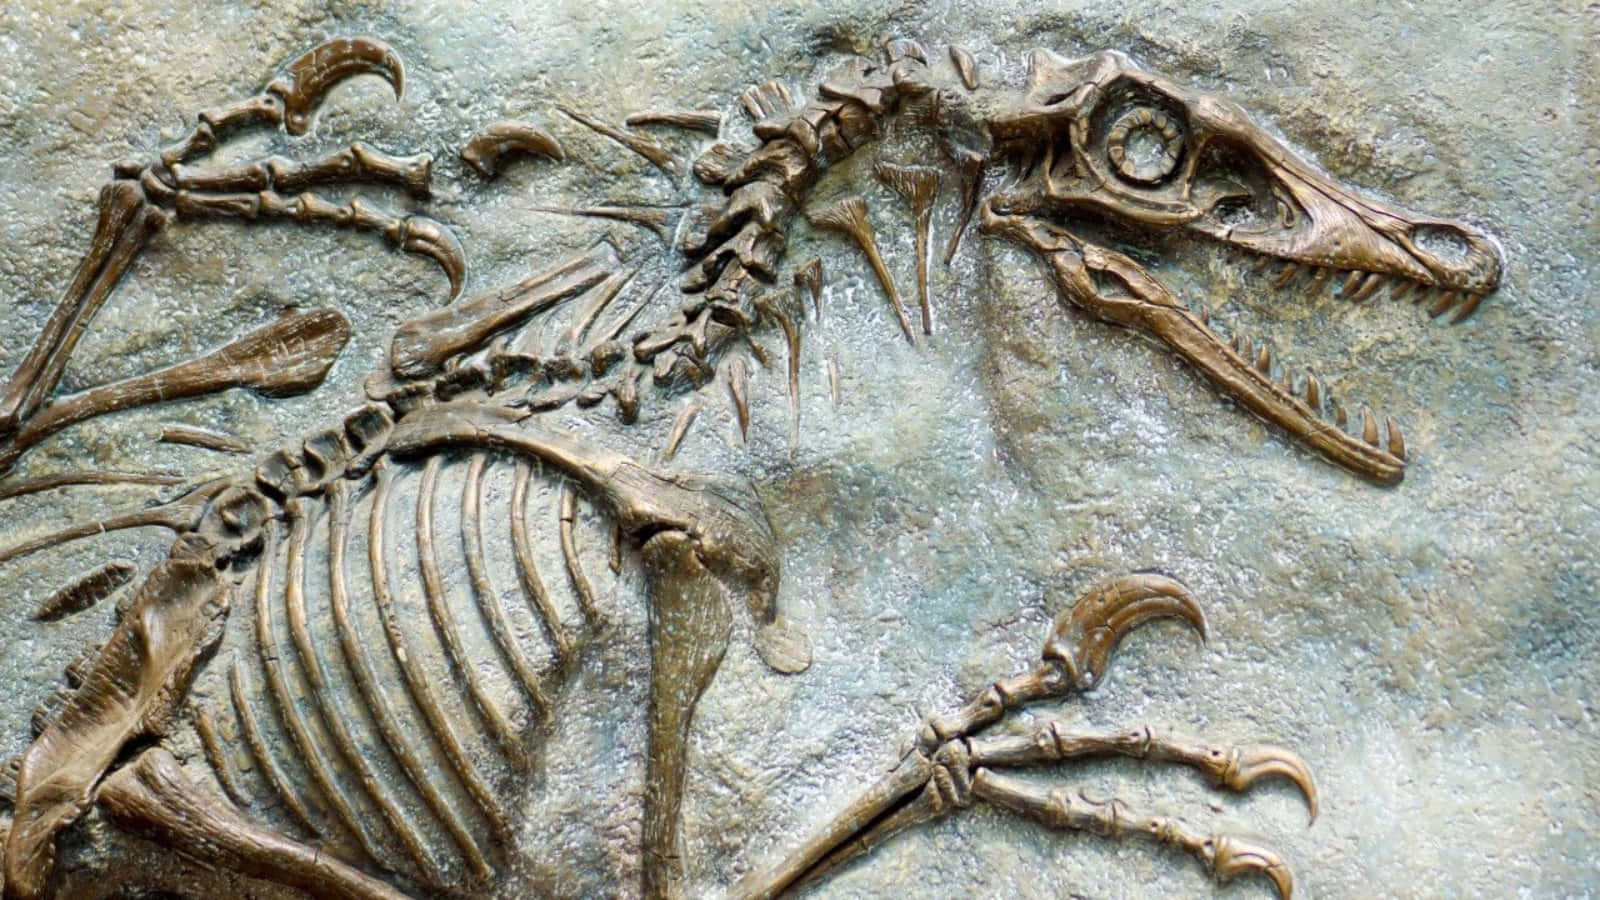 A Skeleton Of A Dinosaur Is Shown On A Wall